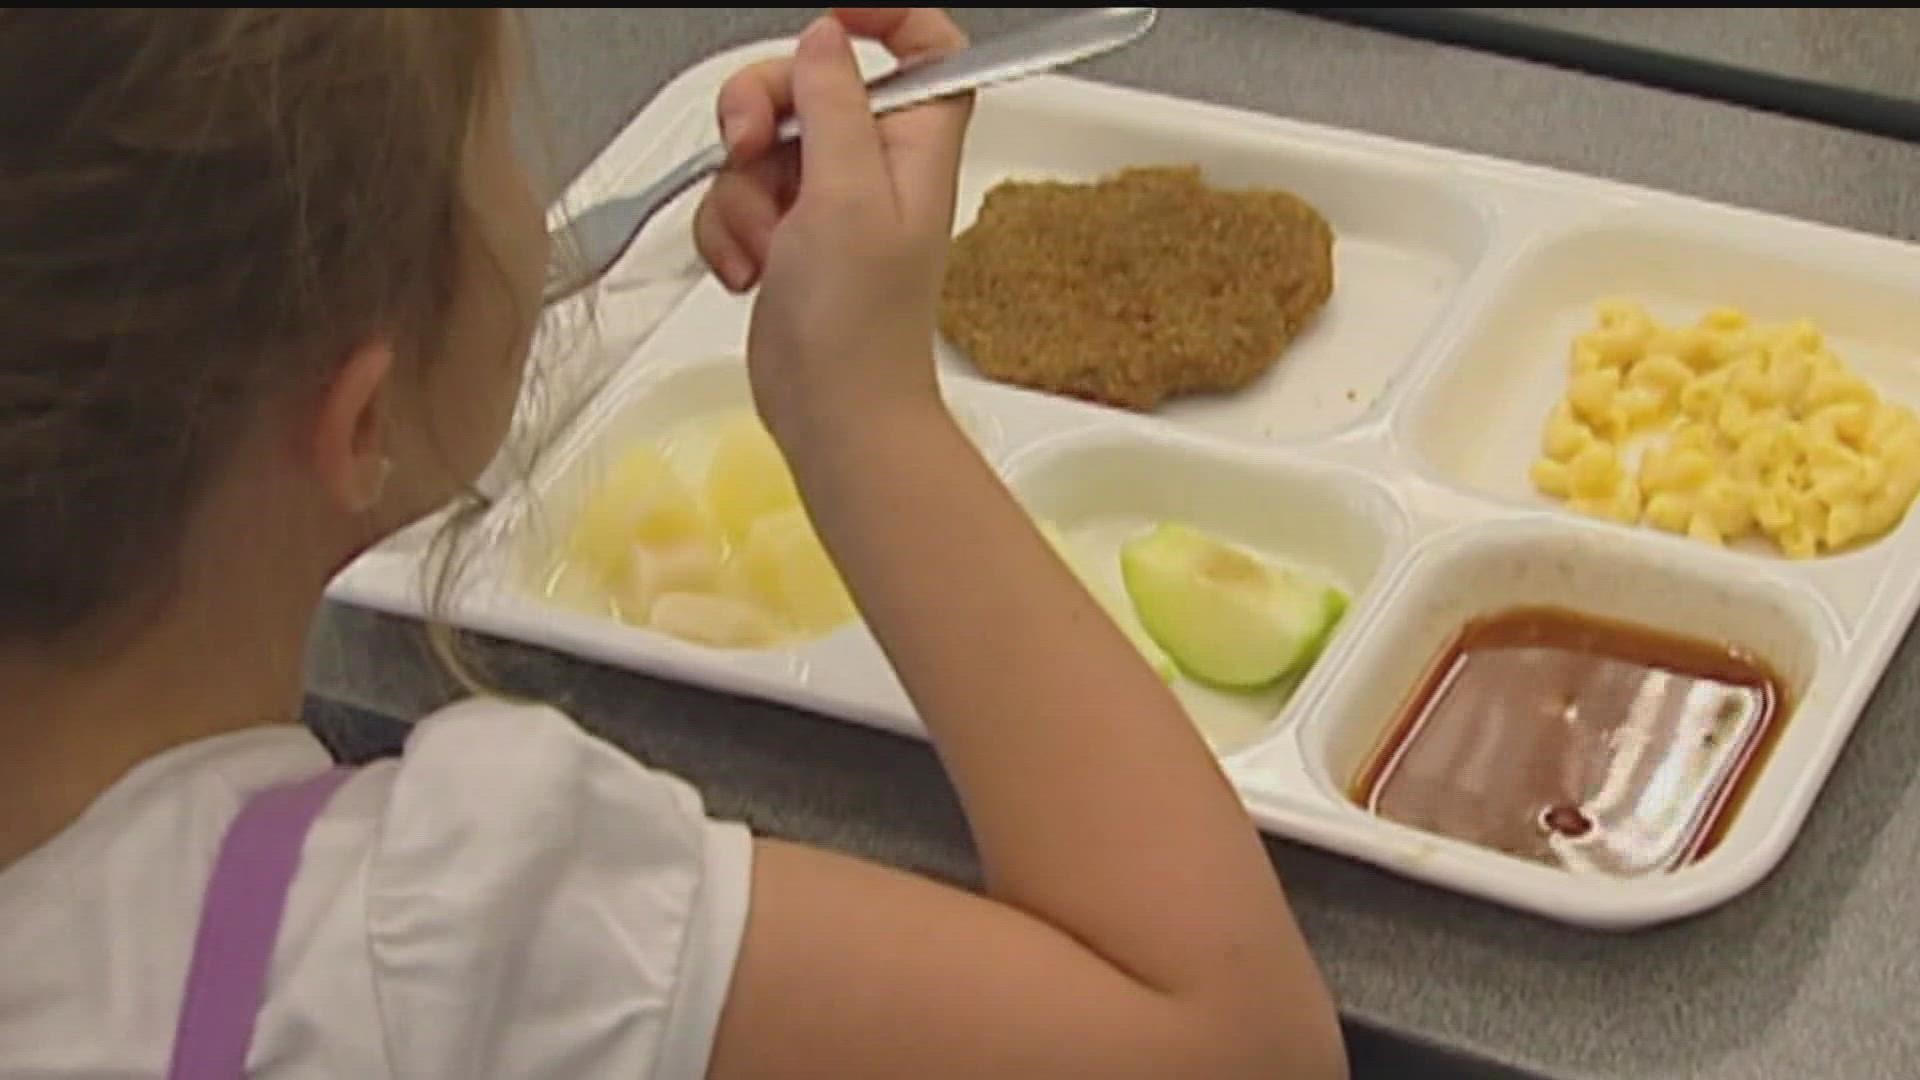 The free meal expansion was made possible after Minnesota was accepted into a pilot program with the USDA.